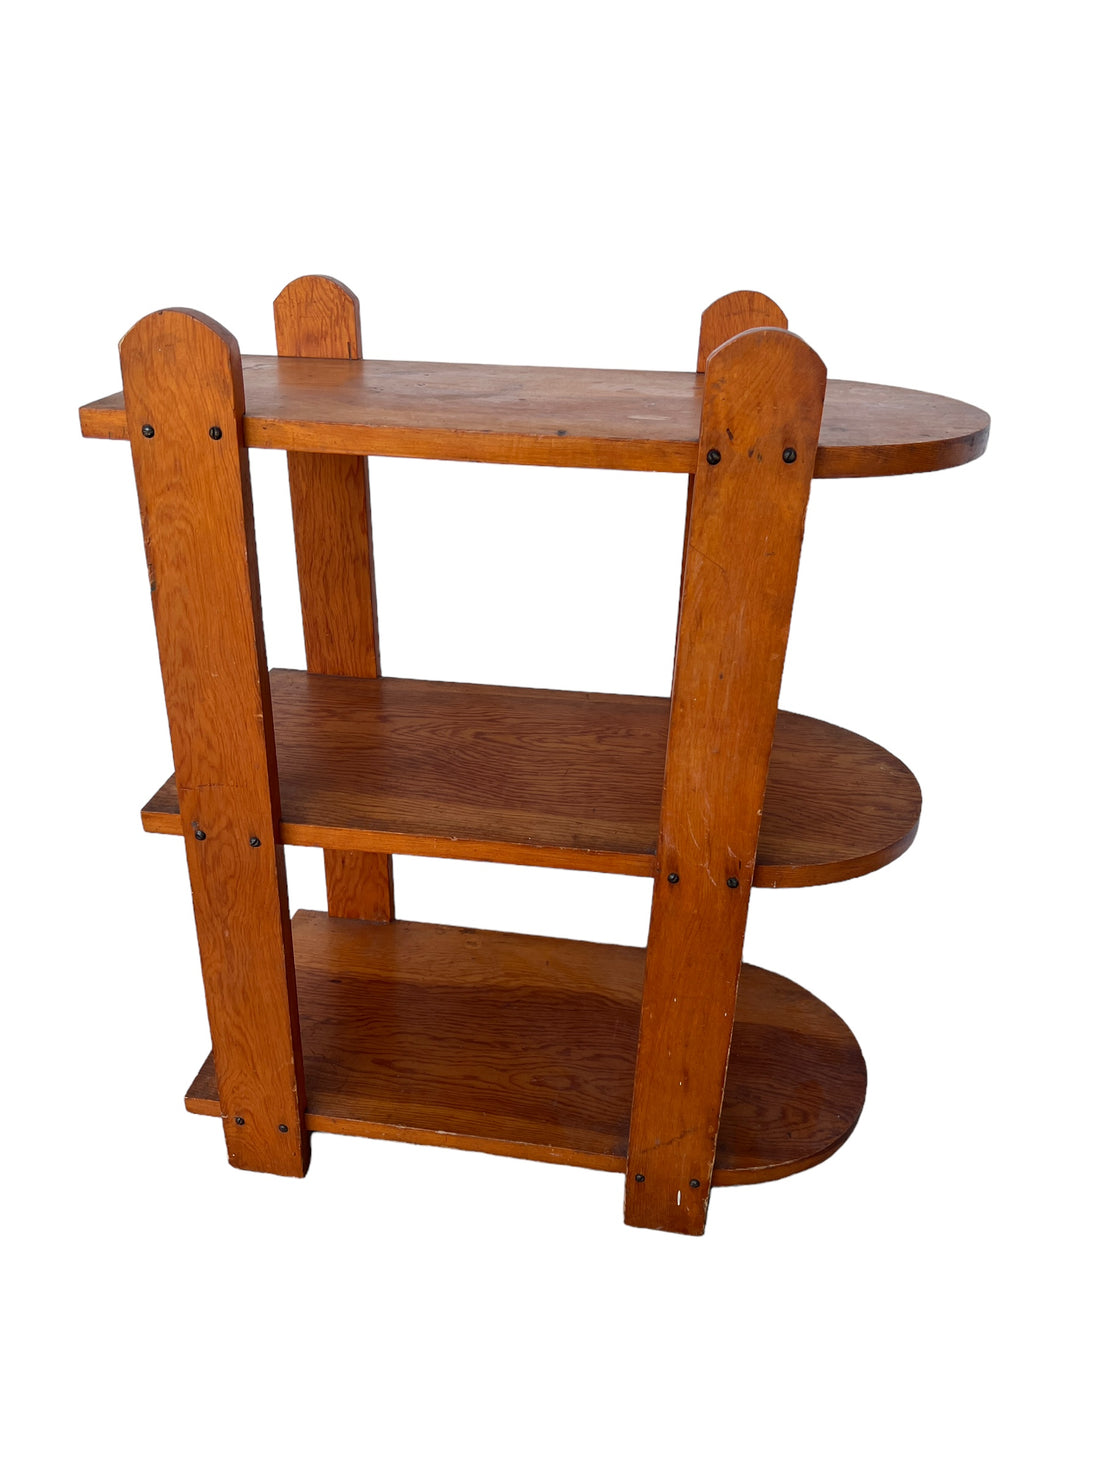 3 Tier Rounded craftsman Wood Side Table Book Shelf